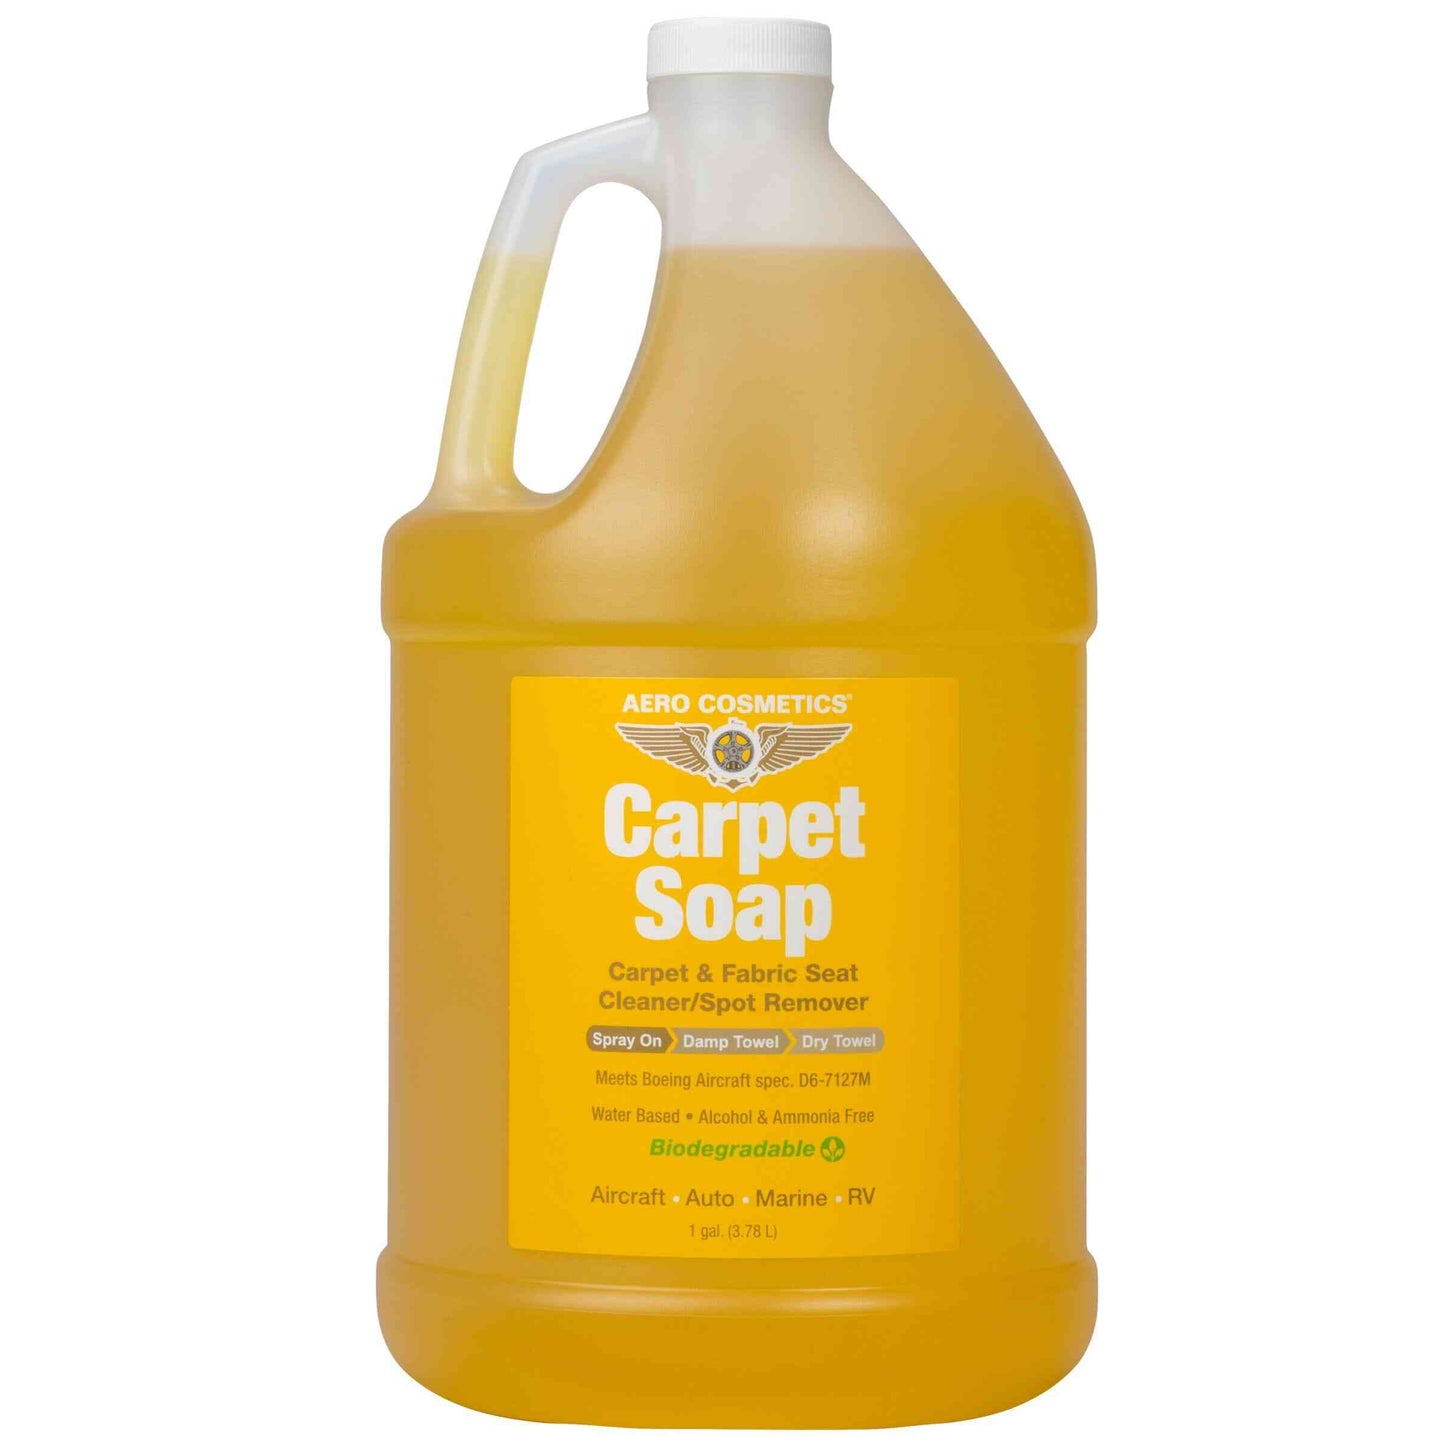 Carpet Soap 1 Gallon - Carpet and Fabric Cleaner